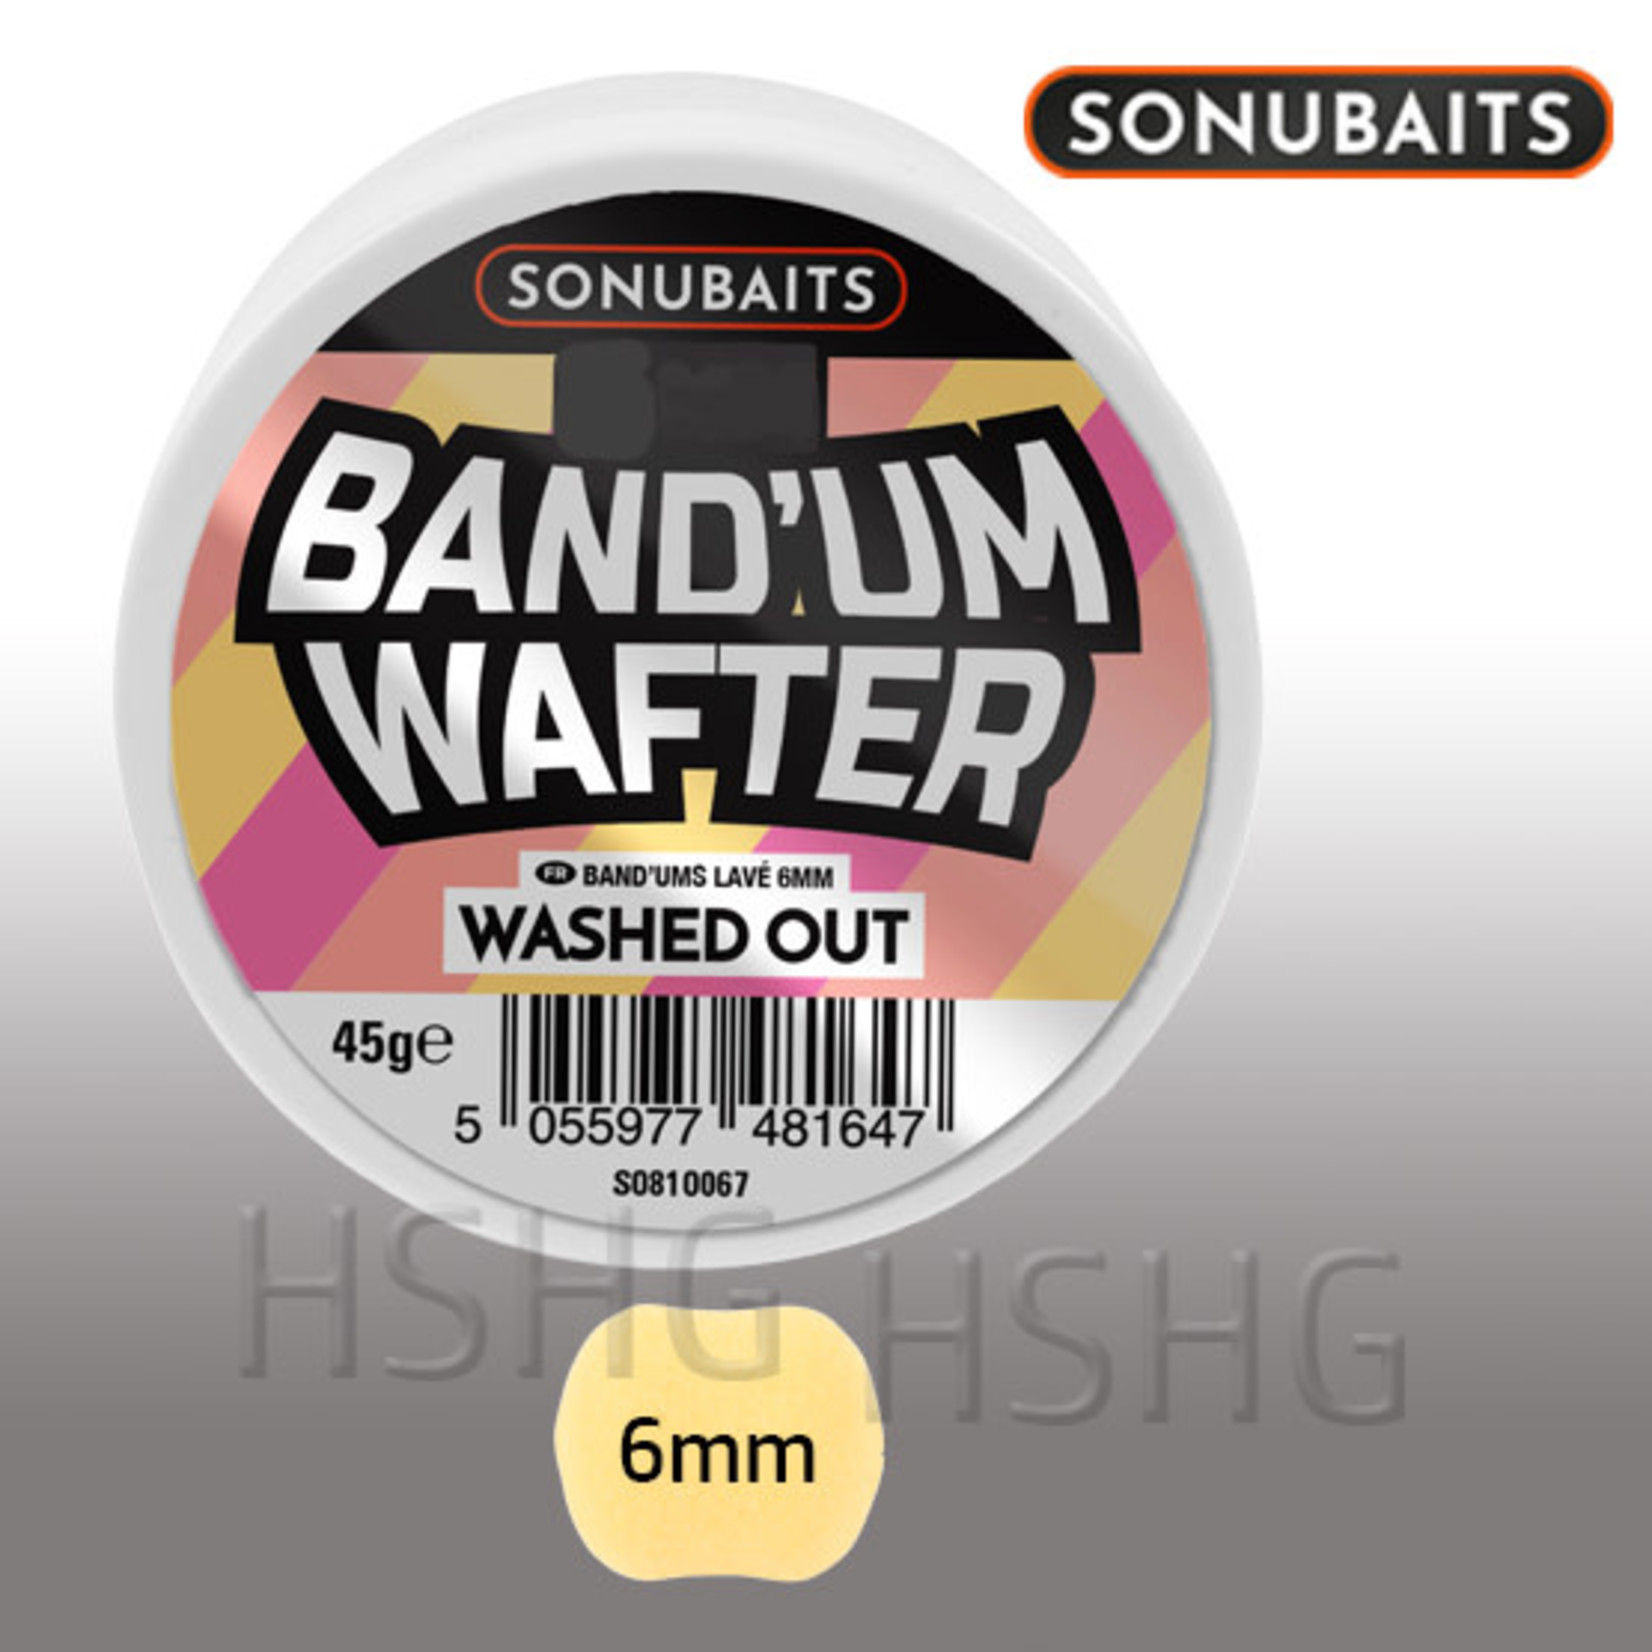 Sonubaits Sonubaits Band'um Wafter Washed Out